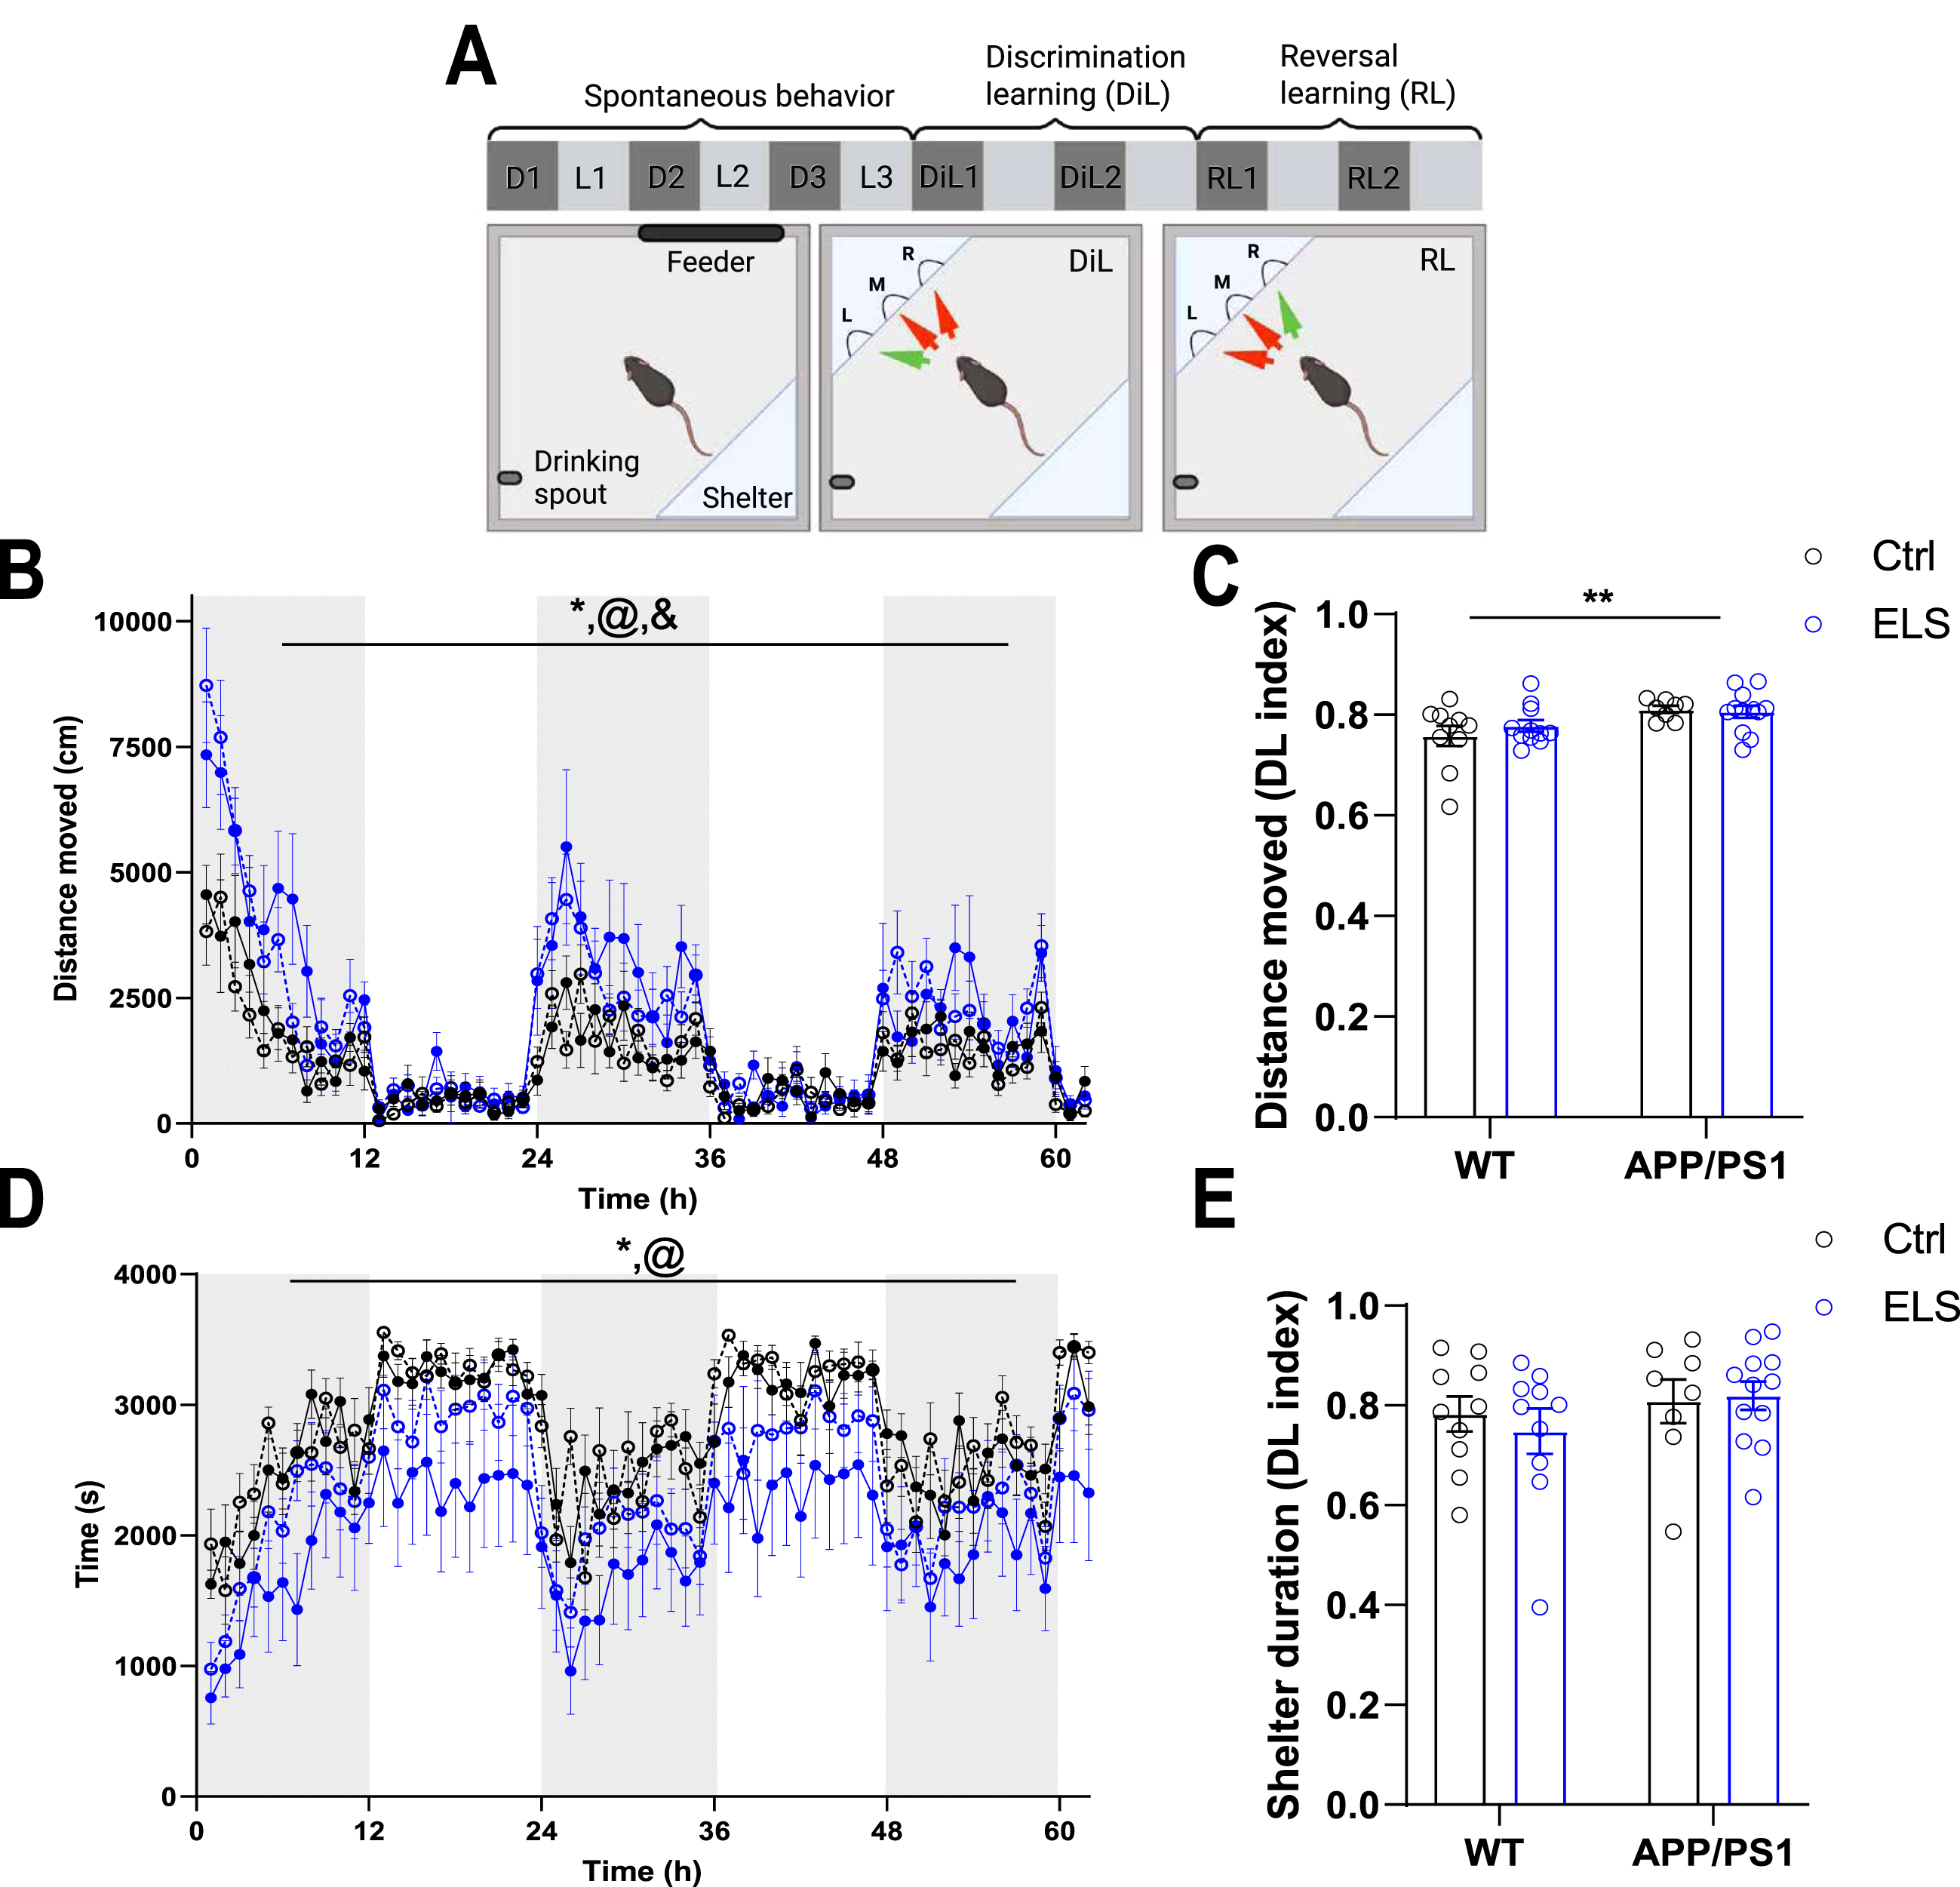 3-month-old APP/PS1 mice display enhanced locomotor activity compared to WT mice. A) Schematic overview of the behavioral paradigm in Phenotyper cages. Spontaneous behavior was assessed for the first 3 days (3 dark (D) and 3 light (L) phases) during habituation to the automated homecages. The 4th day, discrimination learning (DiL) commenced for 2 days (DiL1 and DiL2) during which the left entrance is rewarding followed by 2 days of reversal learning (RL; RL1 and RL2) during which the right entrance is rewarding. Fig. was created with BioRender (https://app.biorender.com/). B) Distance moved in cm and in hourly bouts over the course of 3 days show a significant time effect (Ftime(61,2318) = 28.81, p < 0.001), a genotype effect (Fgenotype(1,38) = 21.8, p < 0.001) and a genotype x time interaction effect (Fgenotypextime(61,2318) = 3.47, p < 0.001). C) APP/PS1 mice have a significantly higher Dark/Light (DL) index for distance moved compared to WT mice (Fgenotype(1,37) = 9.98, p = 0.003). D) Time spend in the shelter in seconds and in hourly bouts over the course of 3 days reveals a genotype effect (Fgenotype(1,61) = 5.22, p = 0.03) and a time effect (Ftime(61,2318) = 18.81, p < 0.001). E) There are no differences between the groups in terms of the DL index for shelter time. WT Ctrl n = 10, WT ELS n = 10, APP/PS1 Ctrl n = 8, APP/PS1 ELS n = 12. Data is presented as mean±SEM. *genotype effect p < 0.05, @time effect p < 0.001, &genotype x time interaction effect p < 0.001.